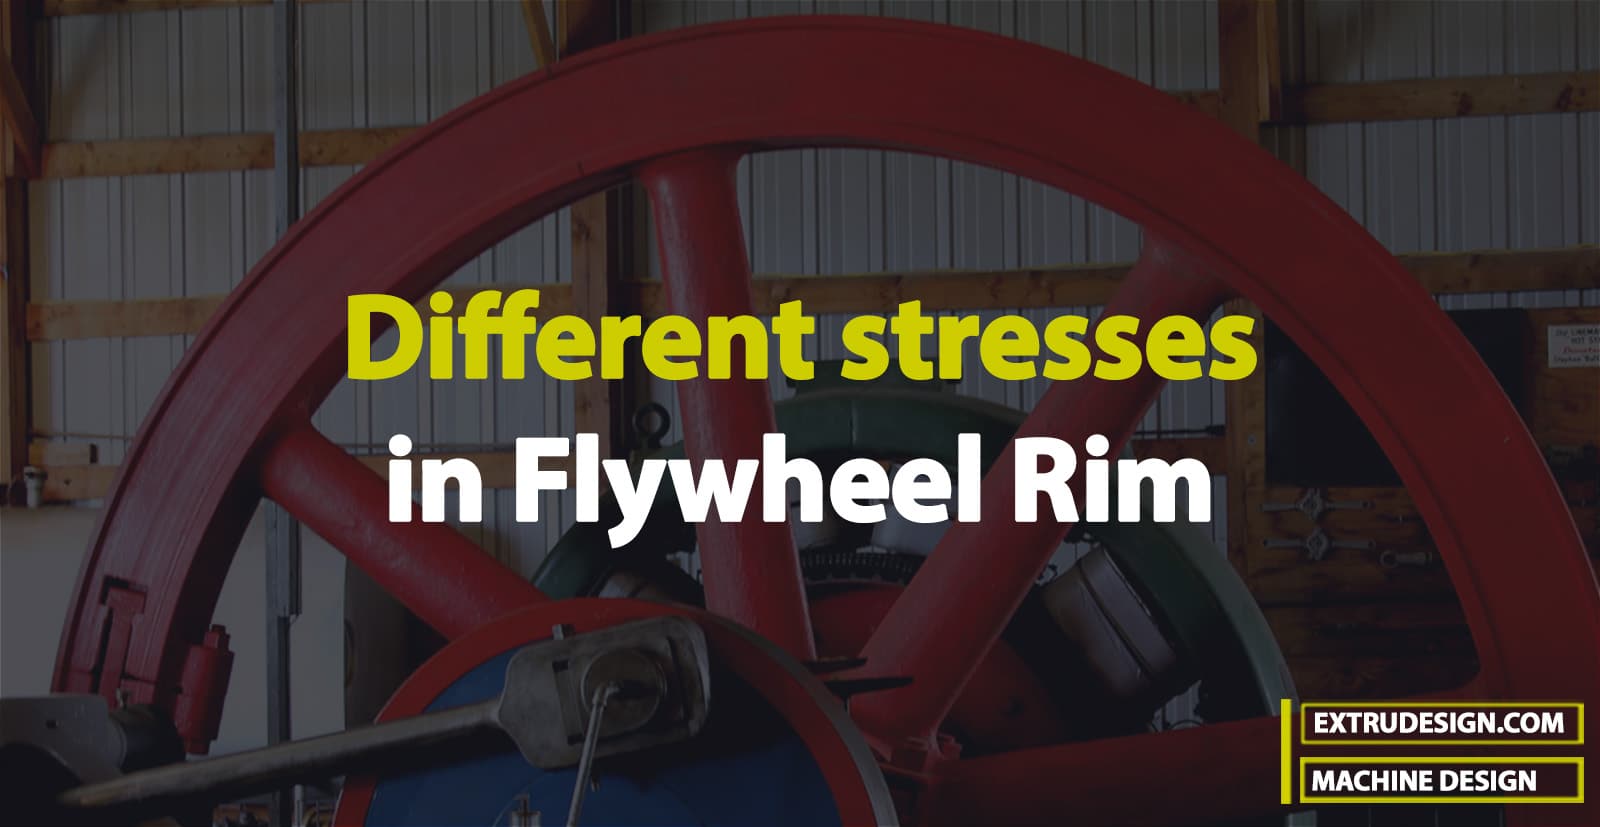 Different stresses in a Flywheel Rim